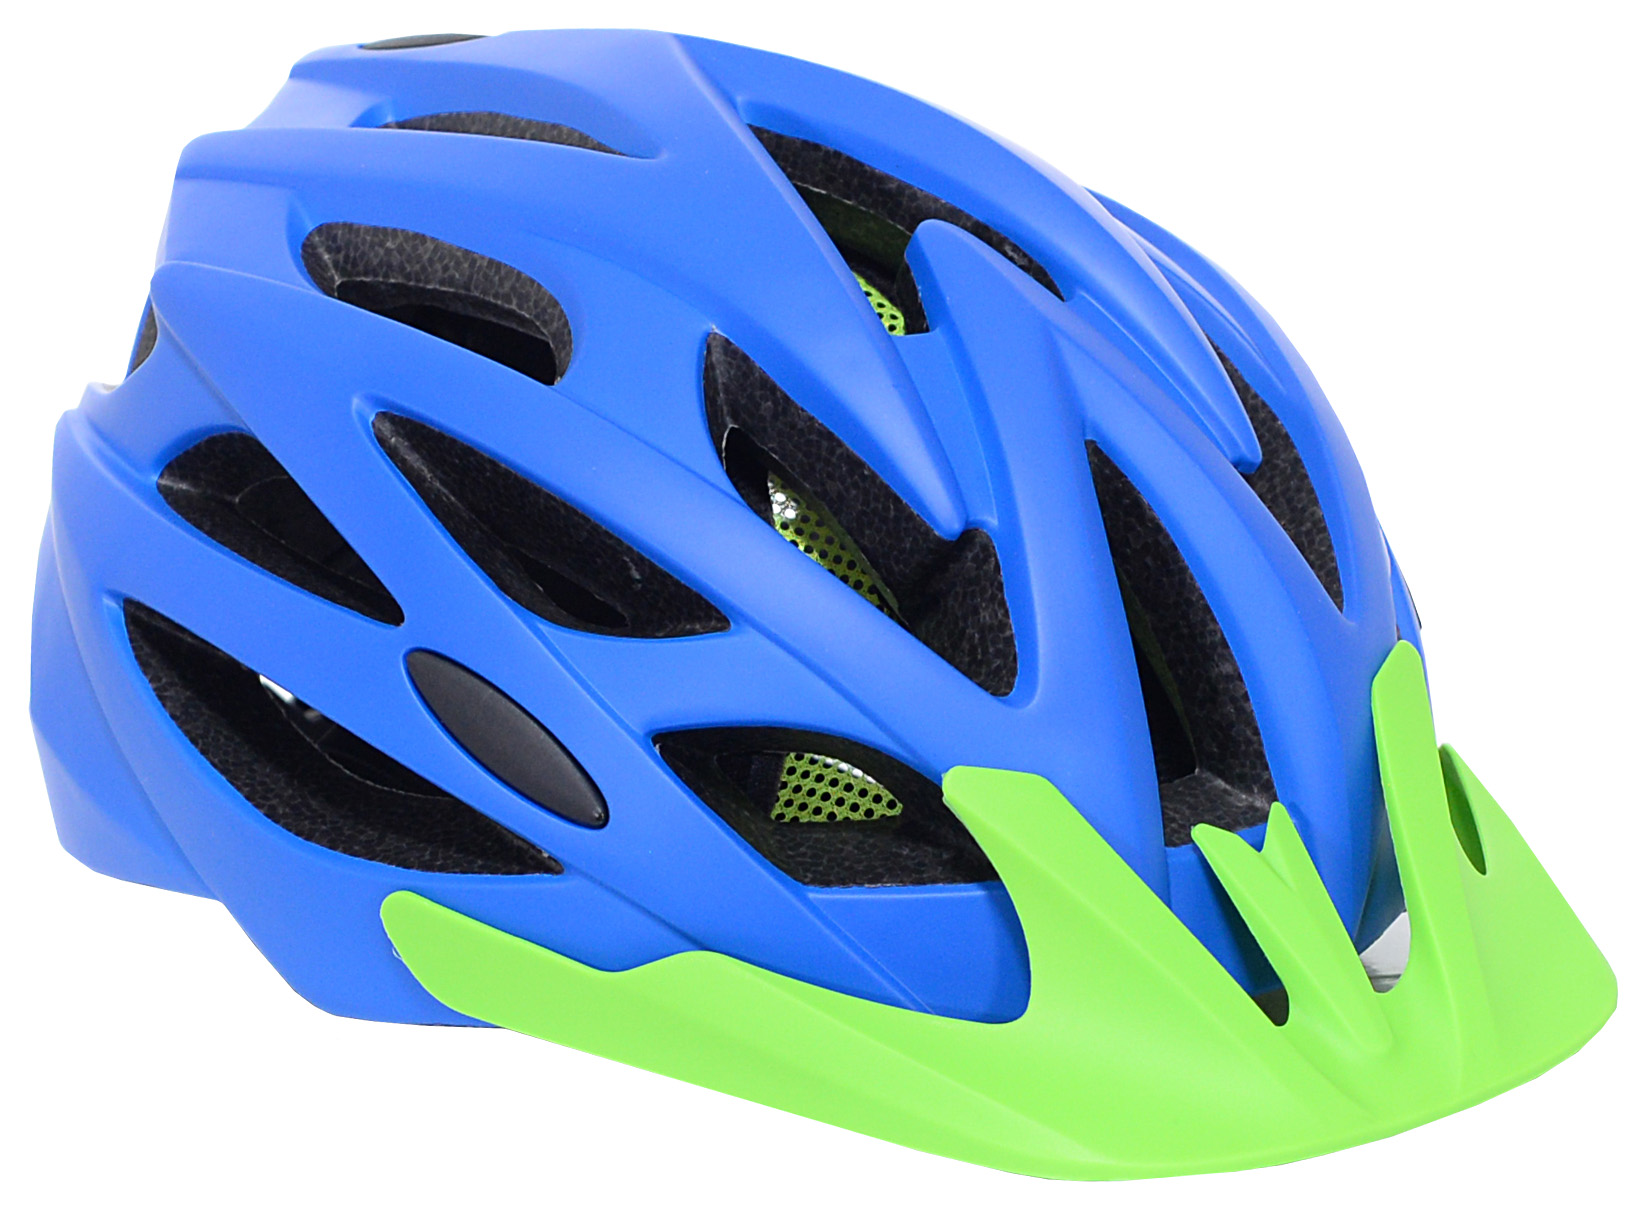 Kent Adult Helmet, Blue and Green with Mesh Liner - image 2 of 6